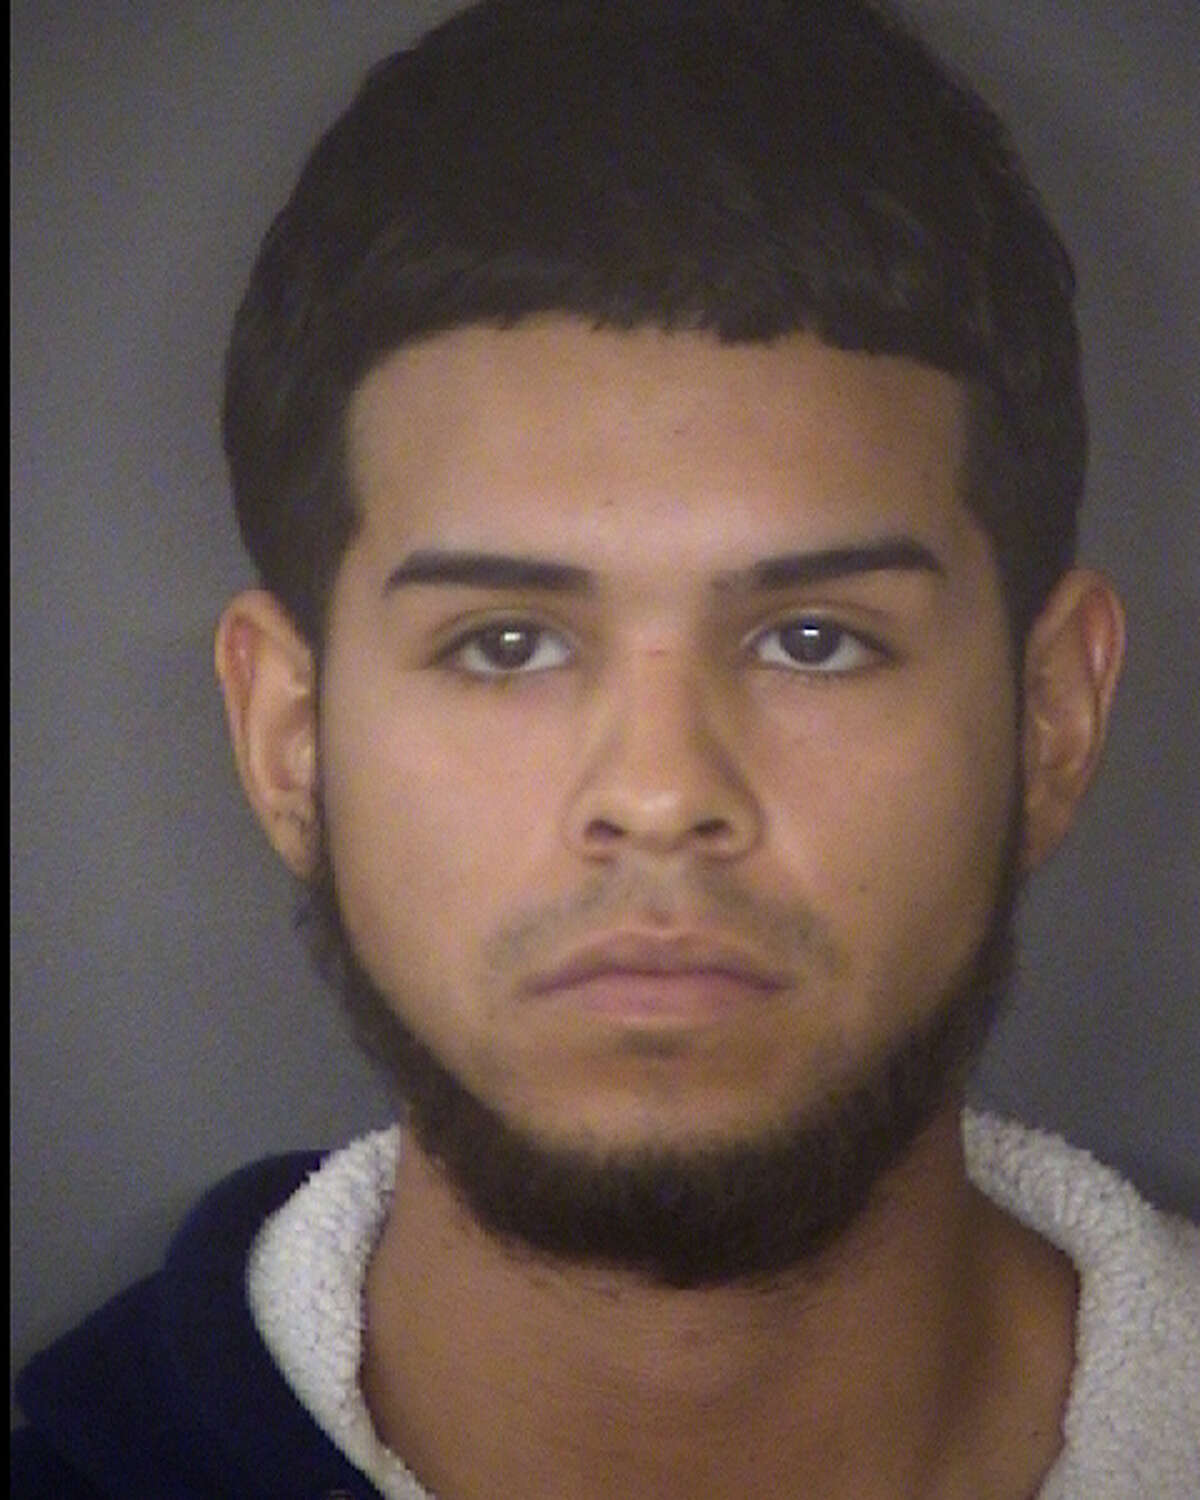 Henry Ruiz was arrested on Dec. 21 on charges of possession of a controlled substance and possession of marijuana but was later released on bond according to court records.